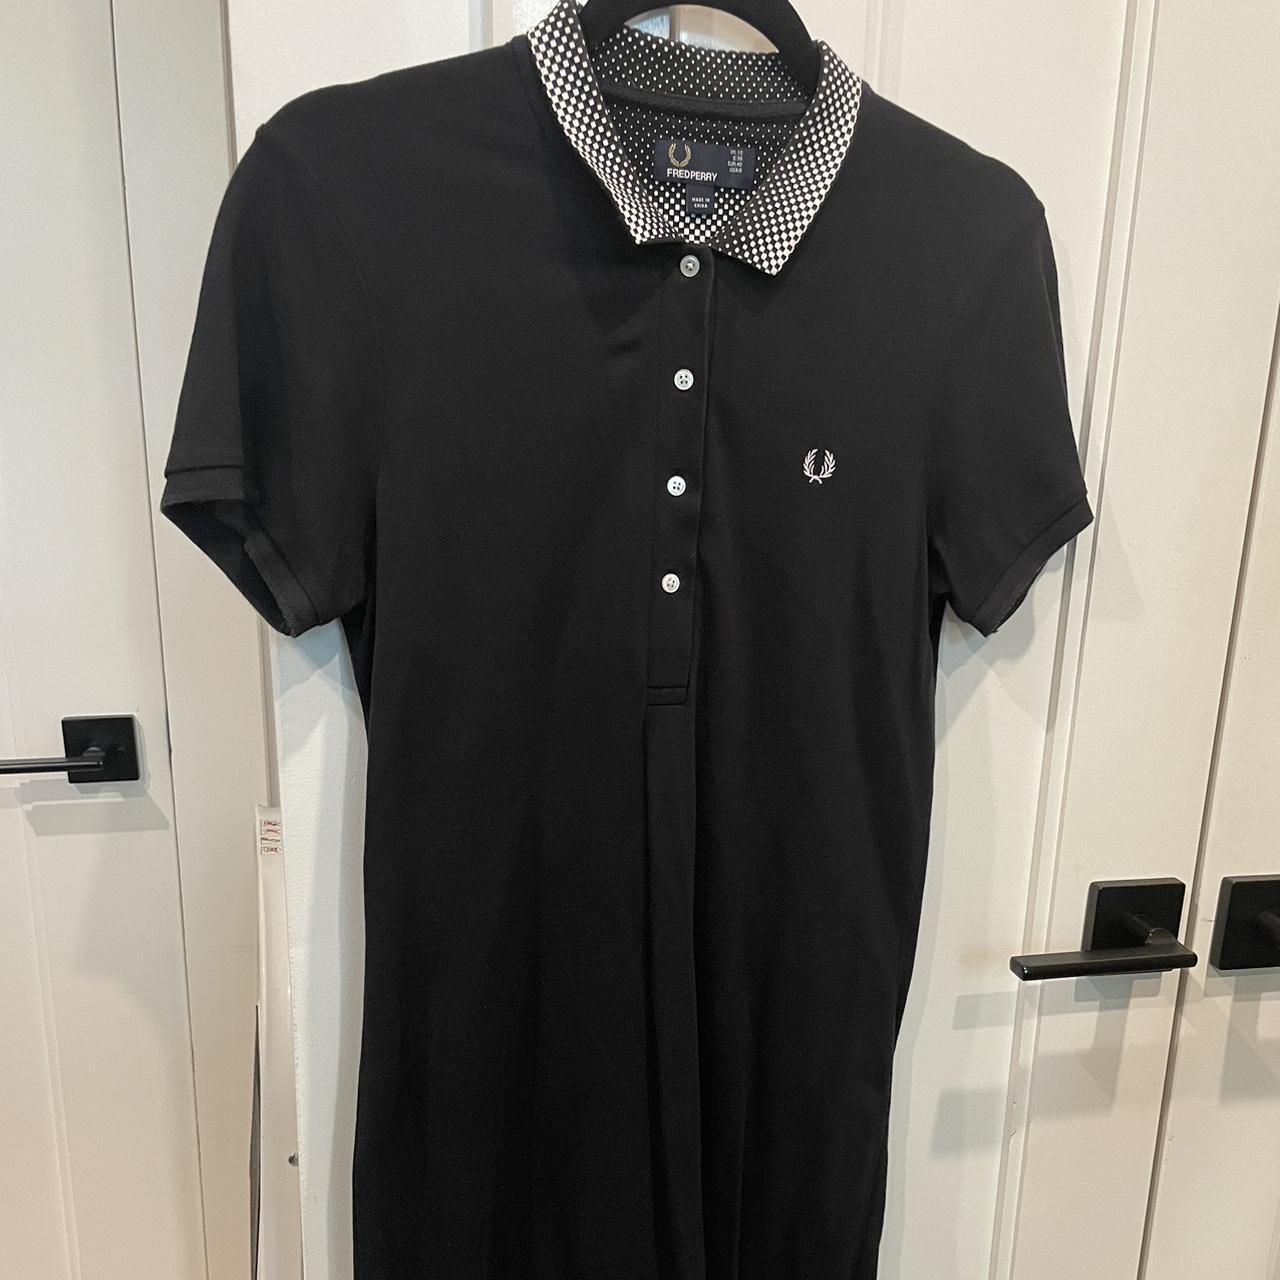 Fred Perry Women's Black and White Dress | Depop